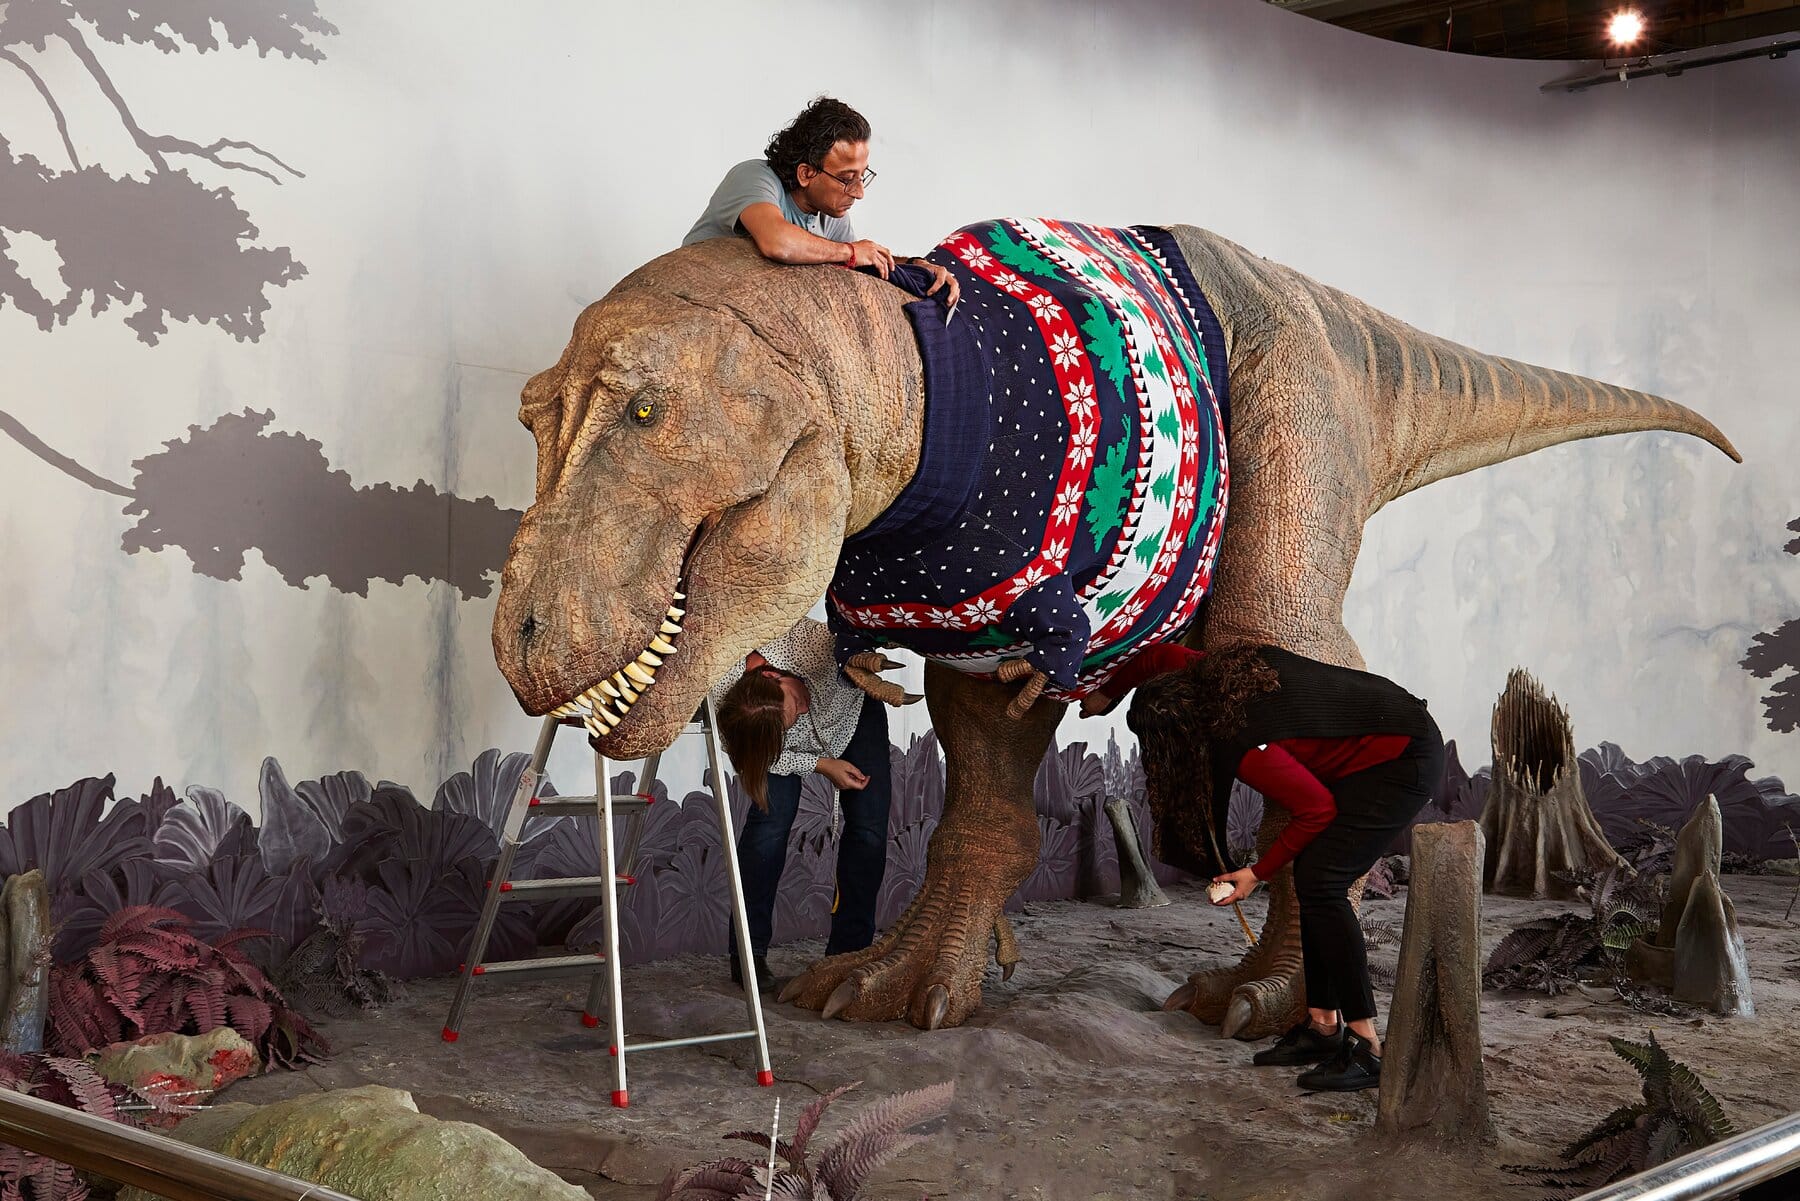 How do you put a on Dinosaur? a jumper Alum Christmas - Patel Snahal knows! Development LSF